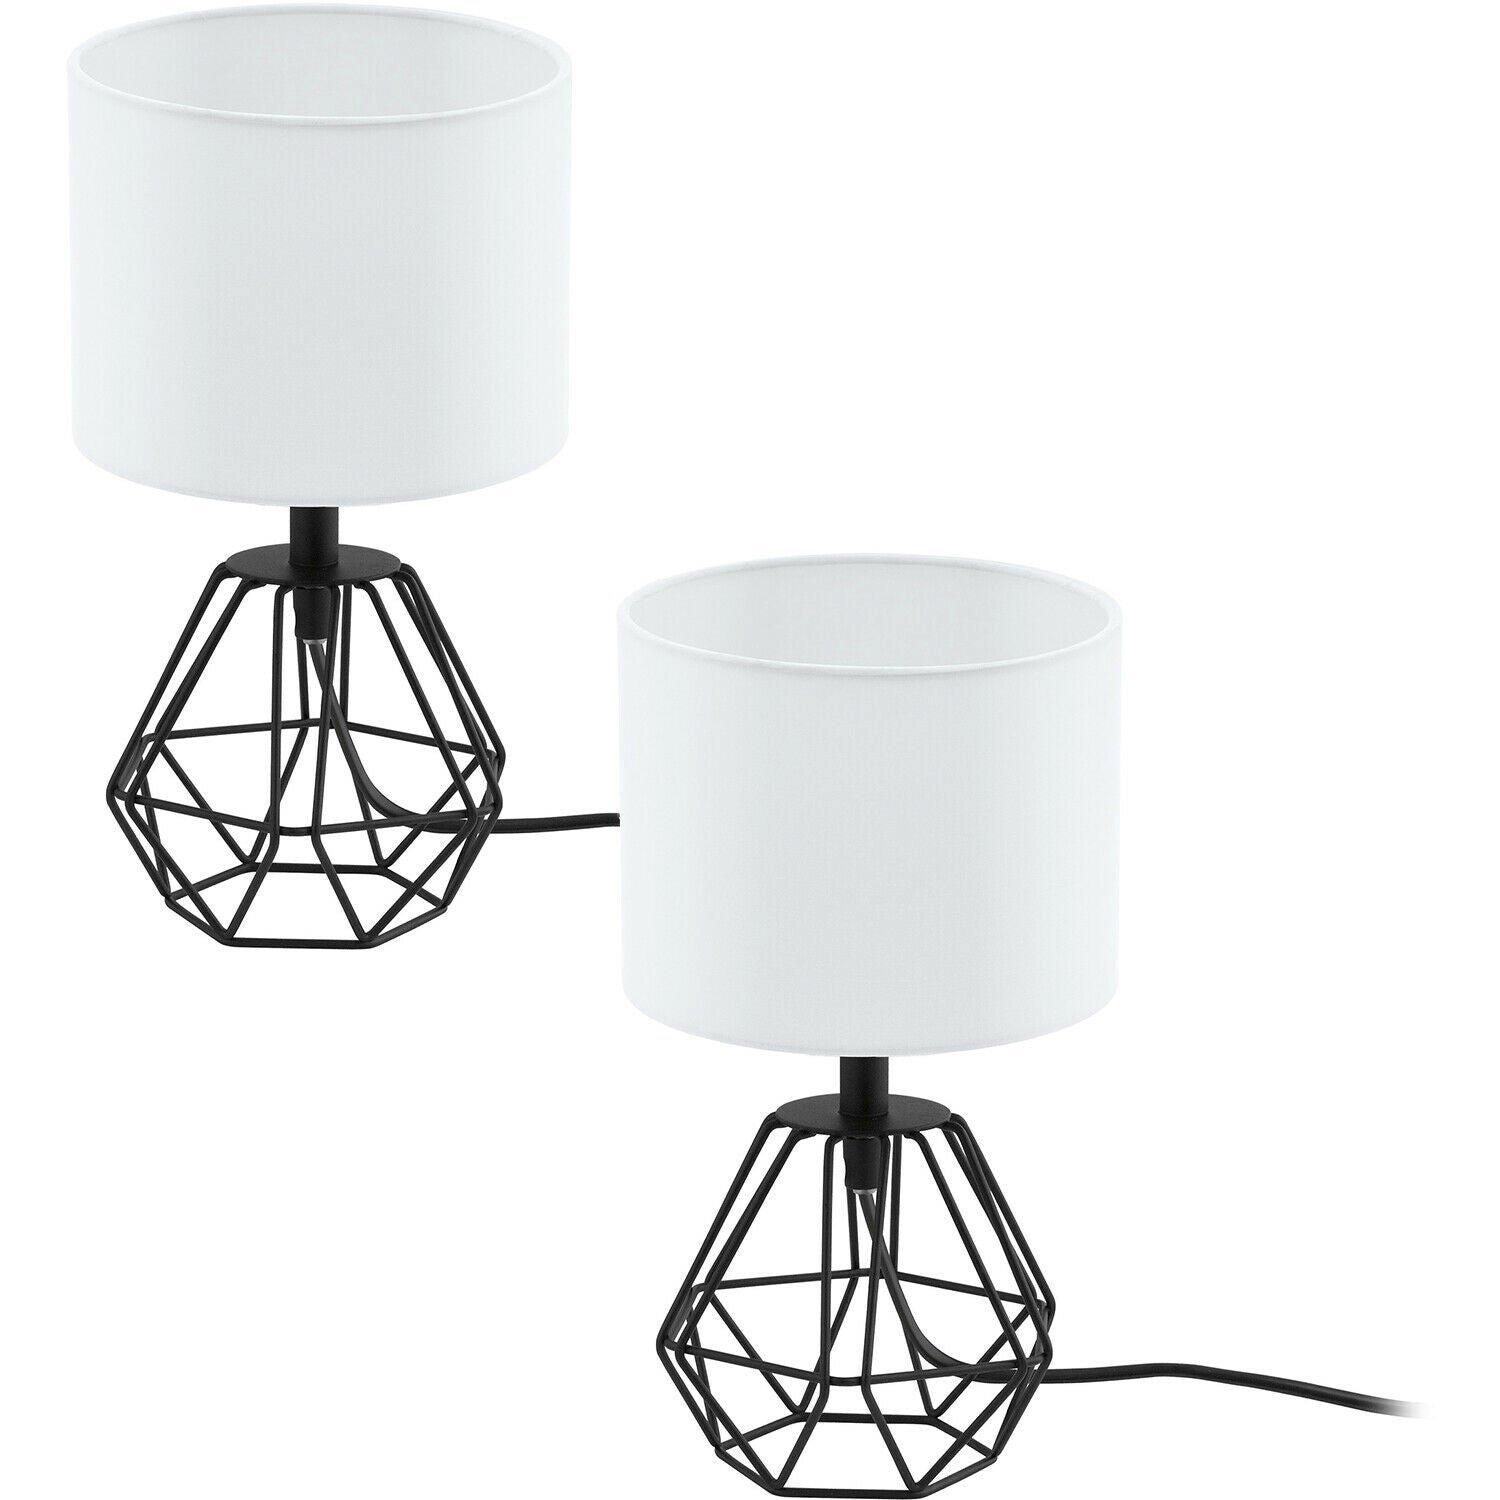 2 PACK Table Lamp Colour Black Base Shade White Fabric In Line Switch E14 1x60W